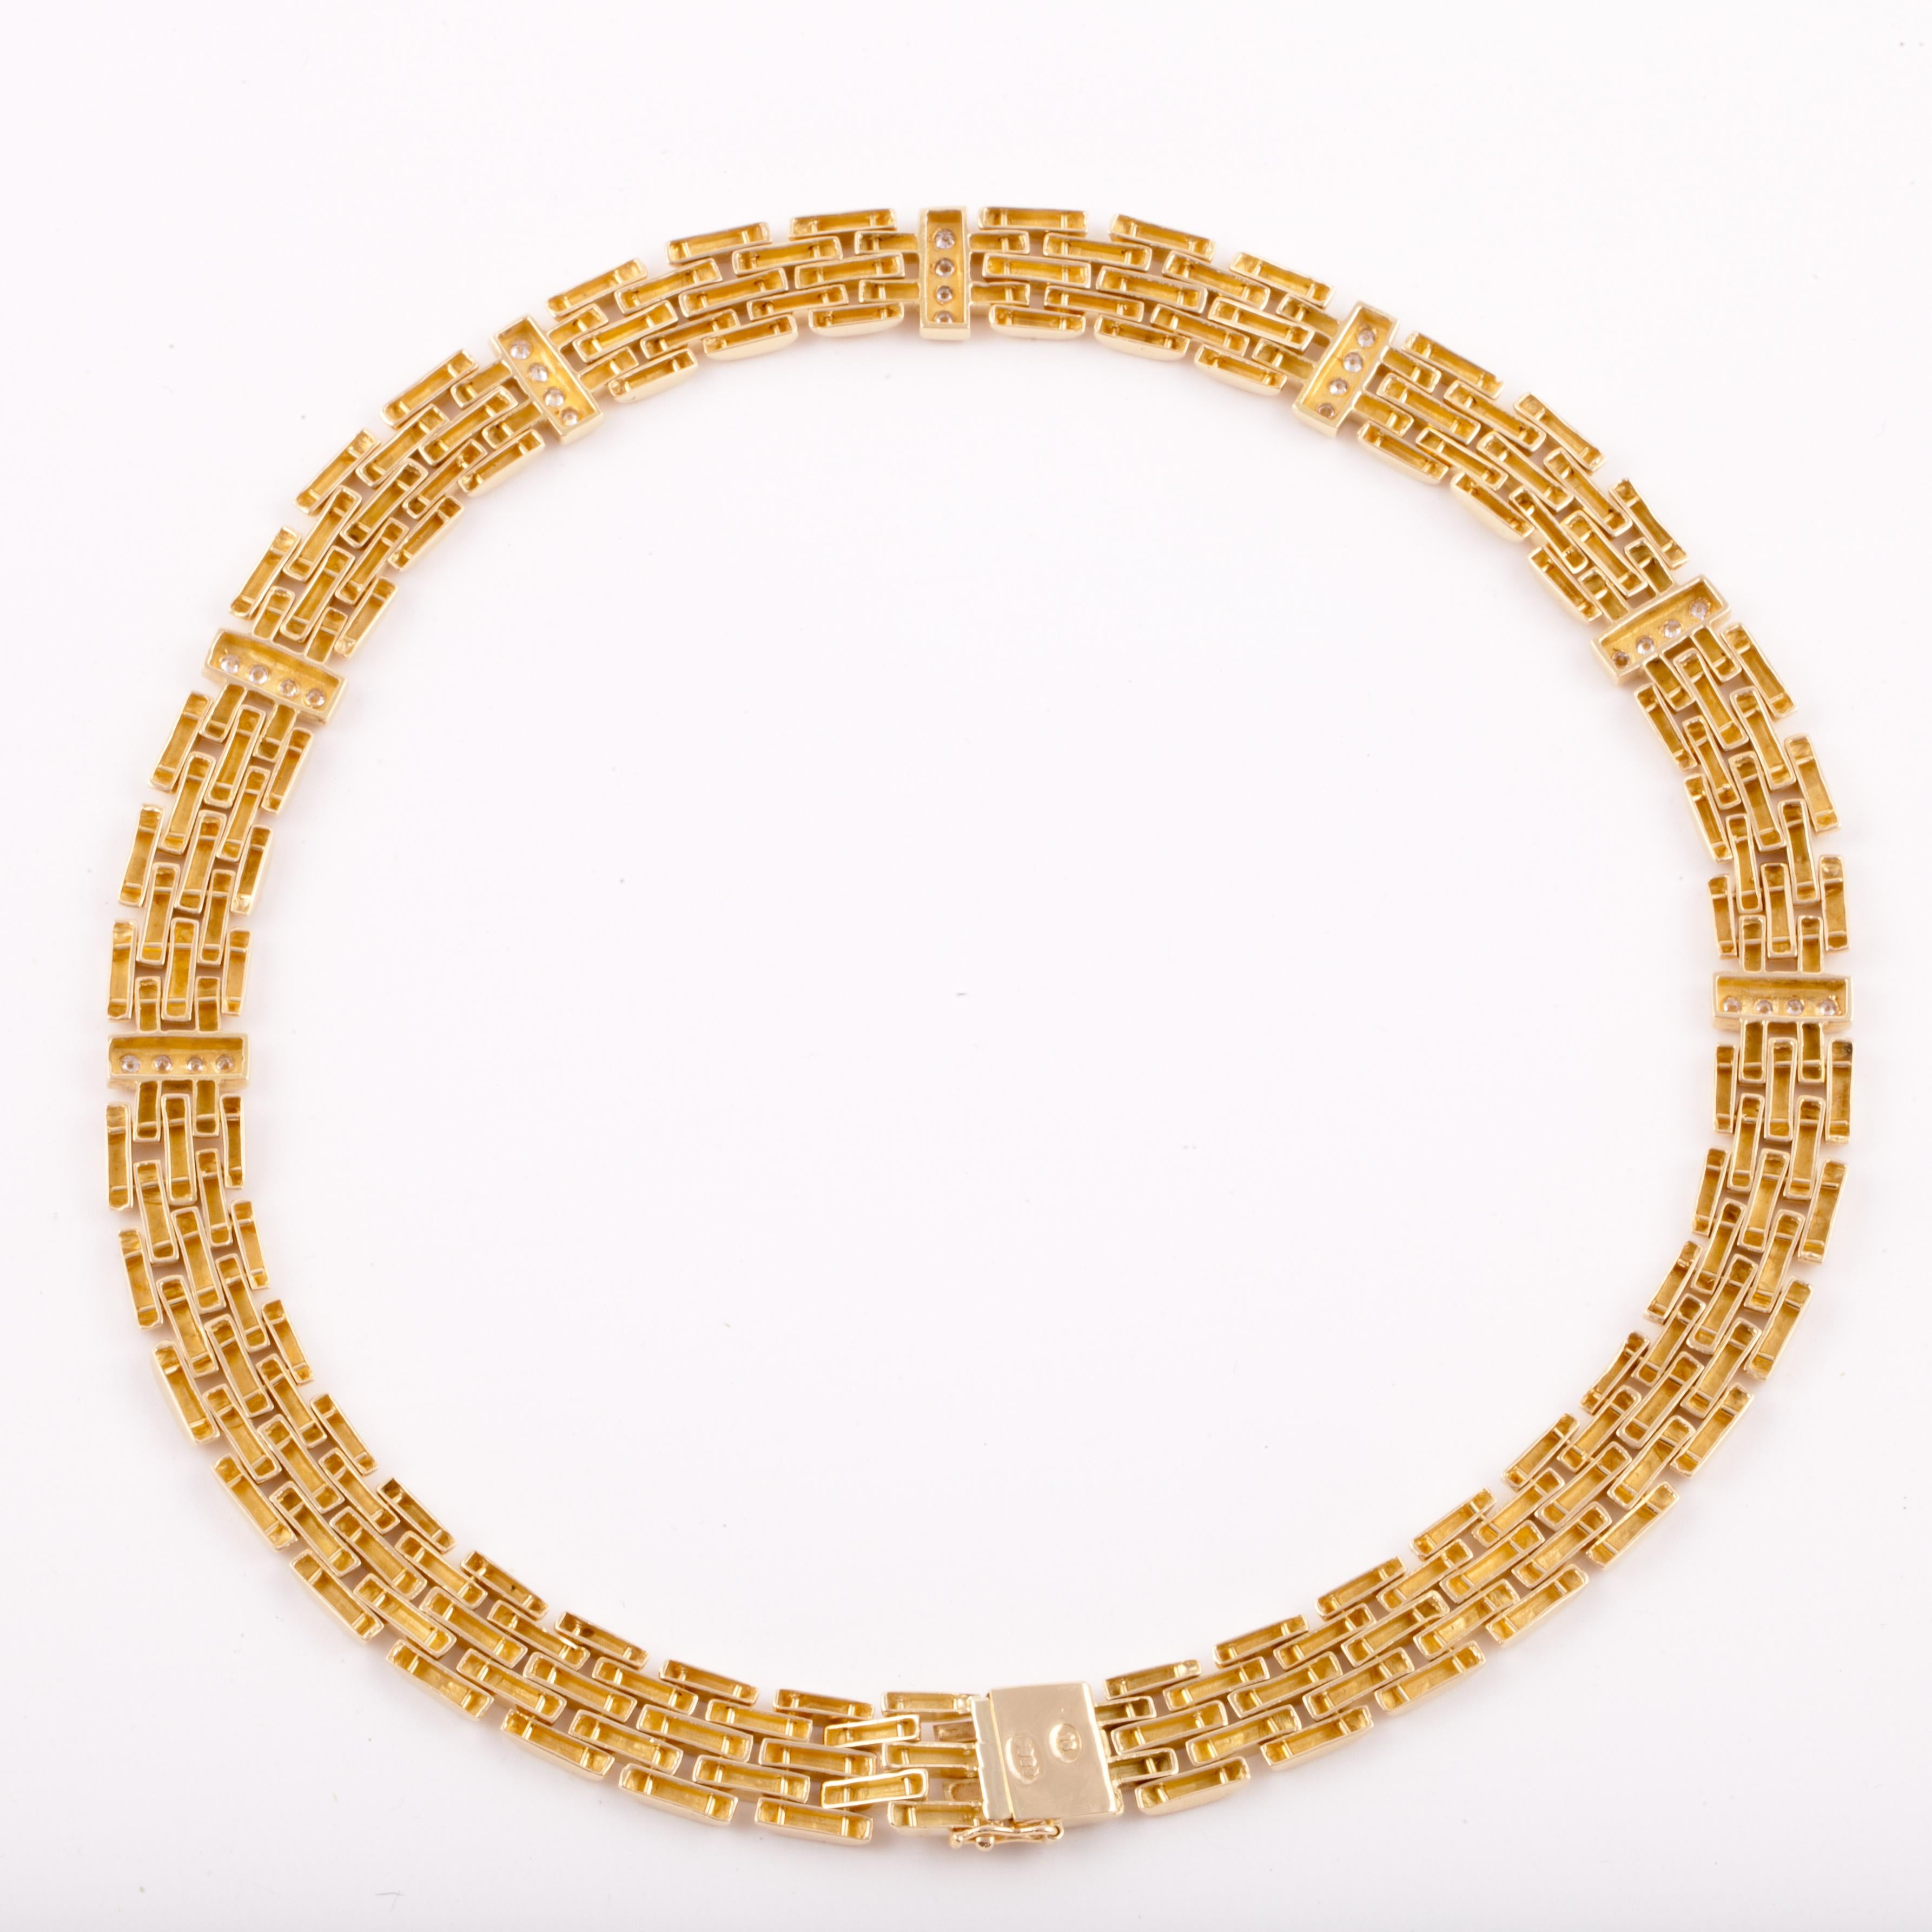 18K yellow gold panther link style necklace with diamonds.  The round diamonds total 1.10 carats,  H-I color and VS clarity.  Measures 16 inches long and 7/16 inches wide.  